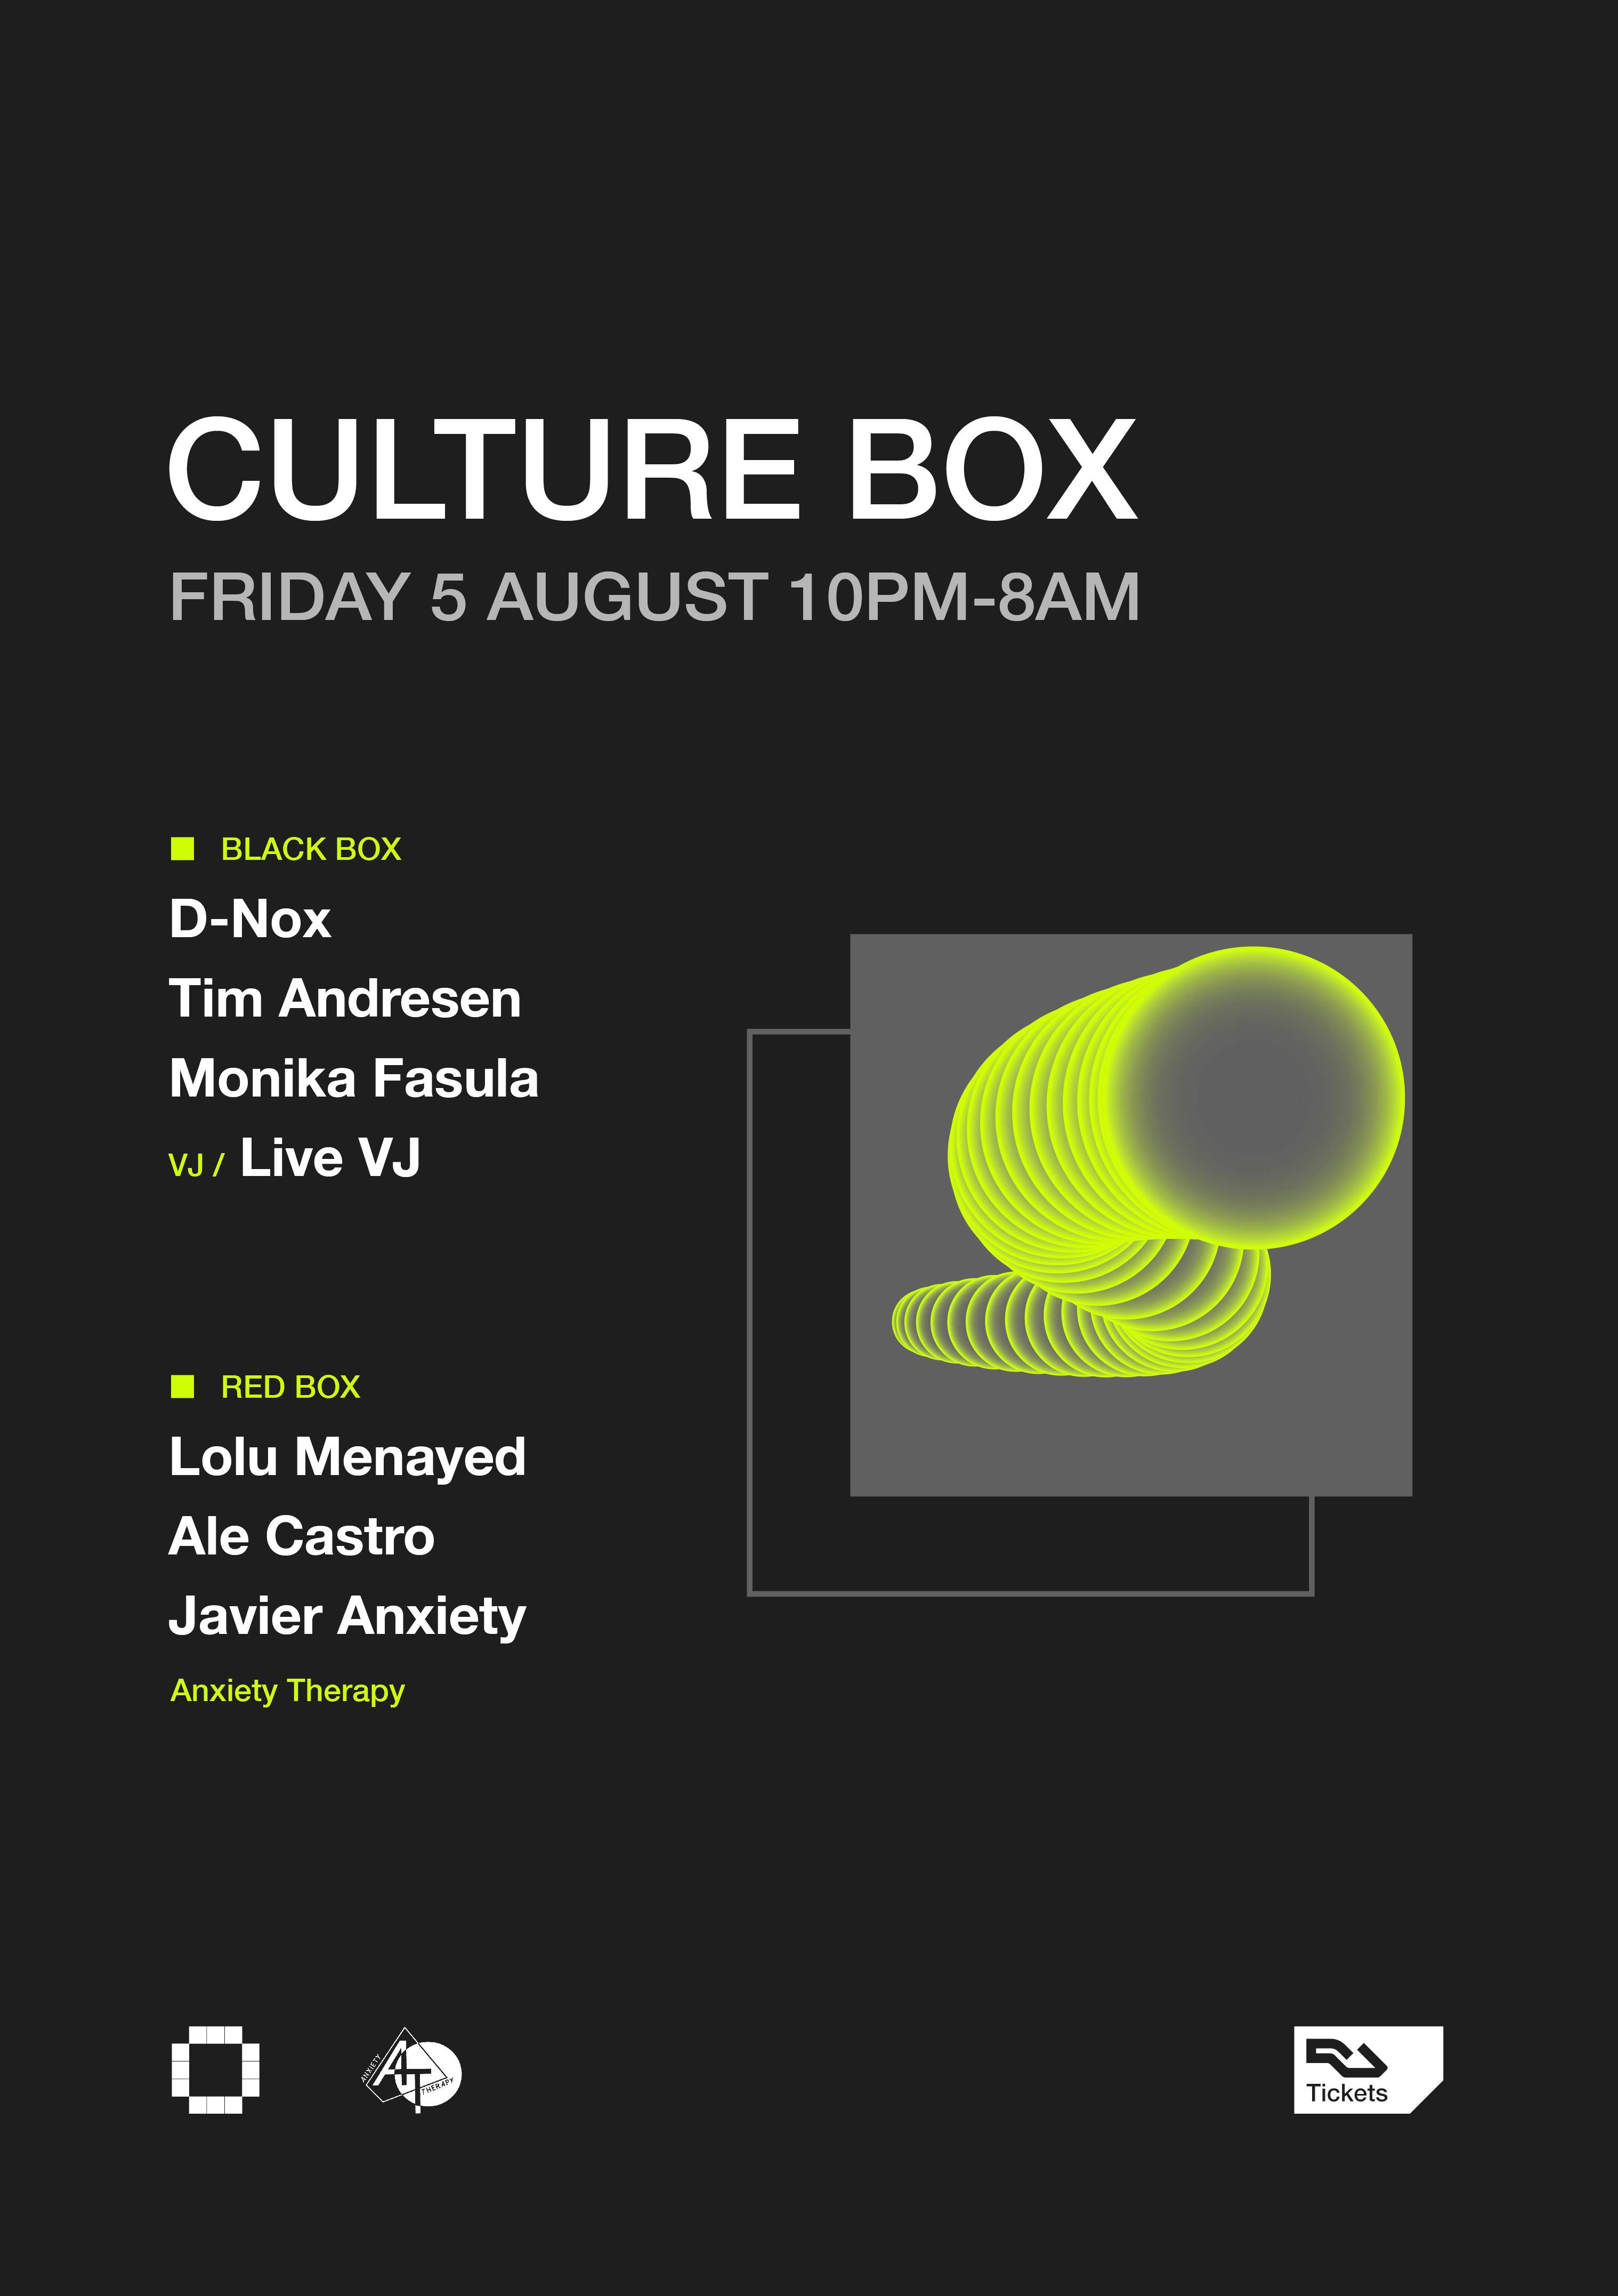 D-Nox / Tim Andresen / Monika Fasula / Anxiety Therapy: Lolu Menayed / Ale Castro / Javier Anxi - フライヤー表